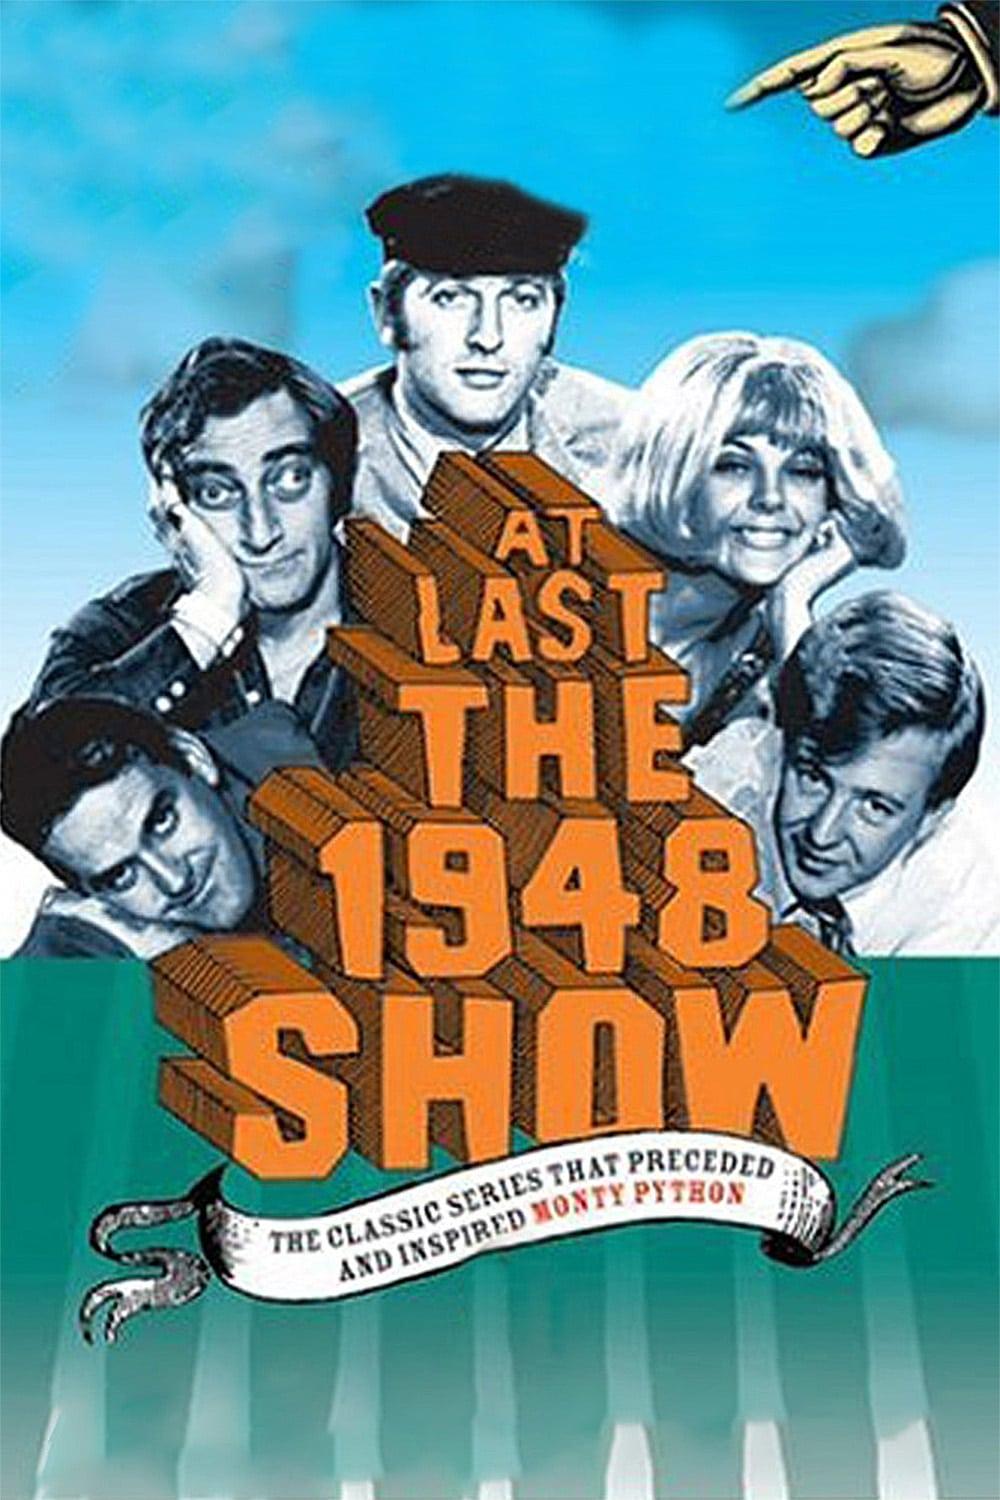 At Last the 1948 Show poster